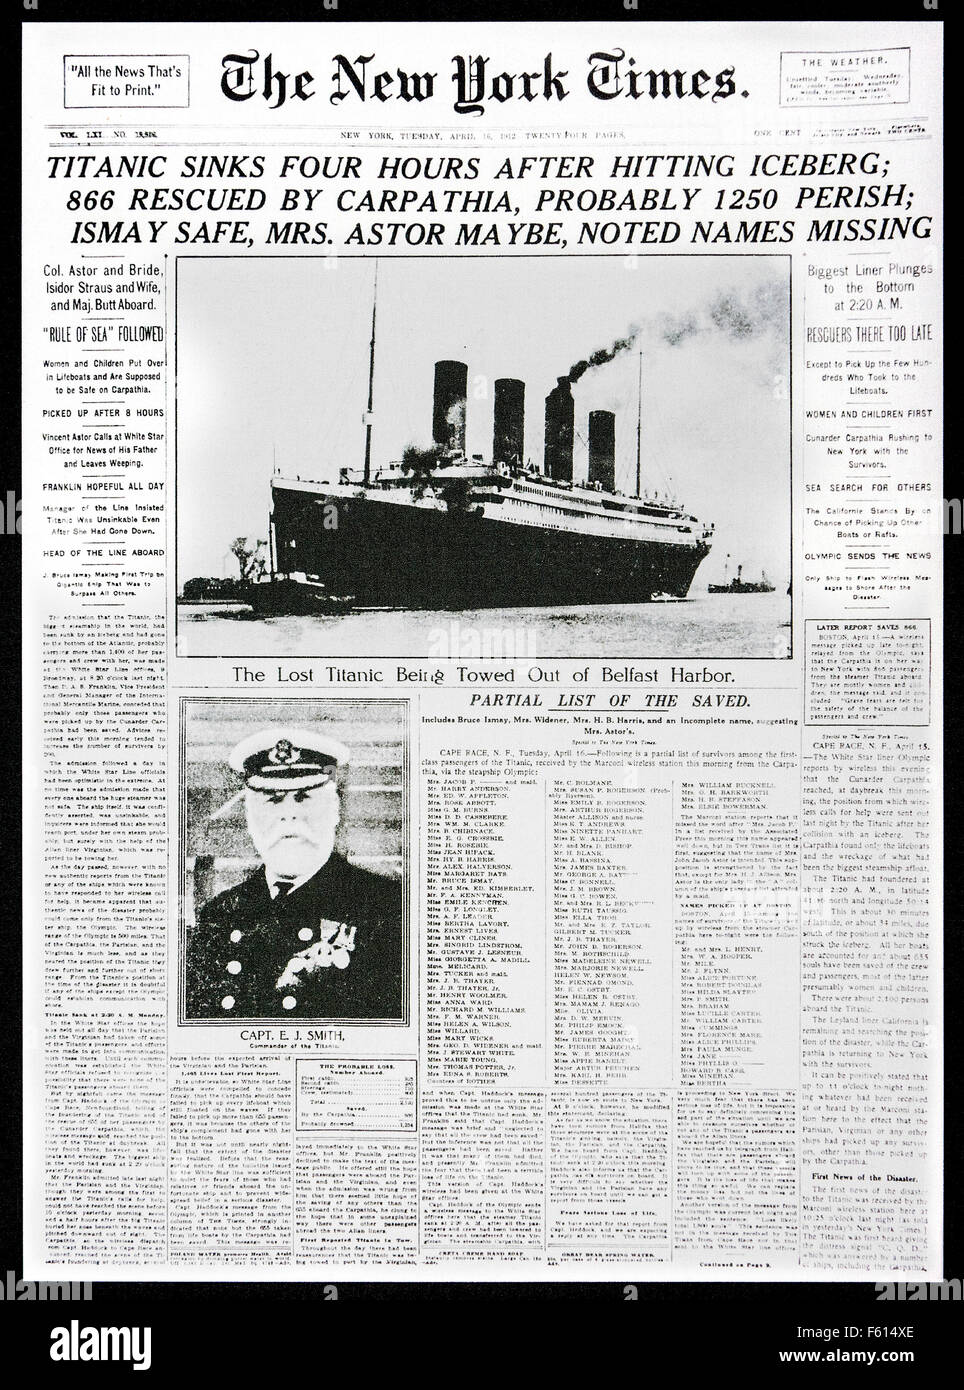 1912 front page news of The New York Times reporting the sinking of ...